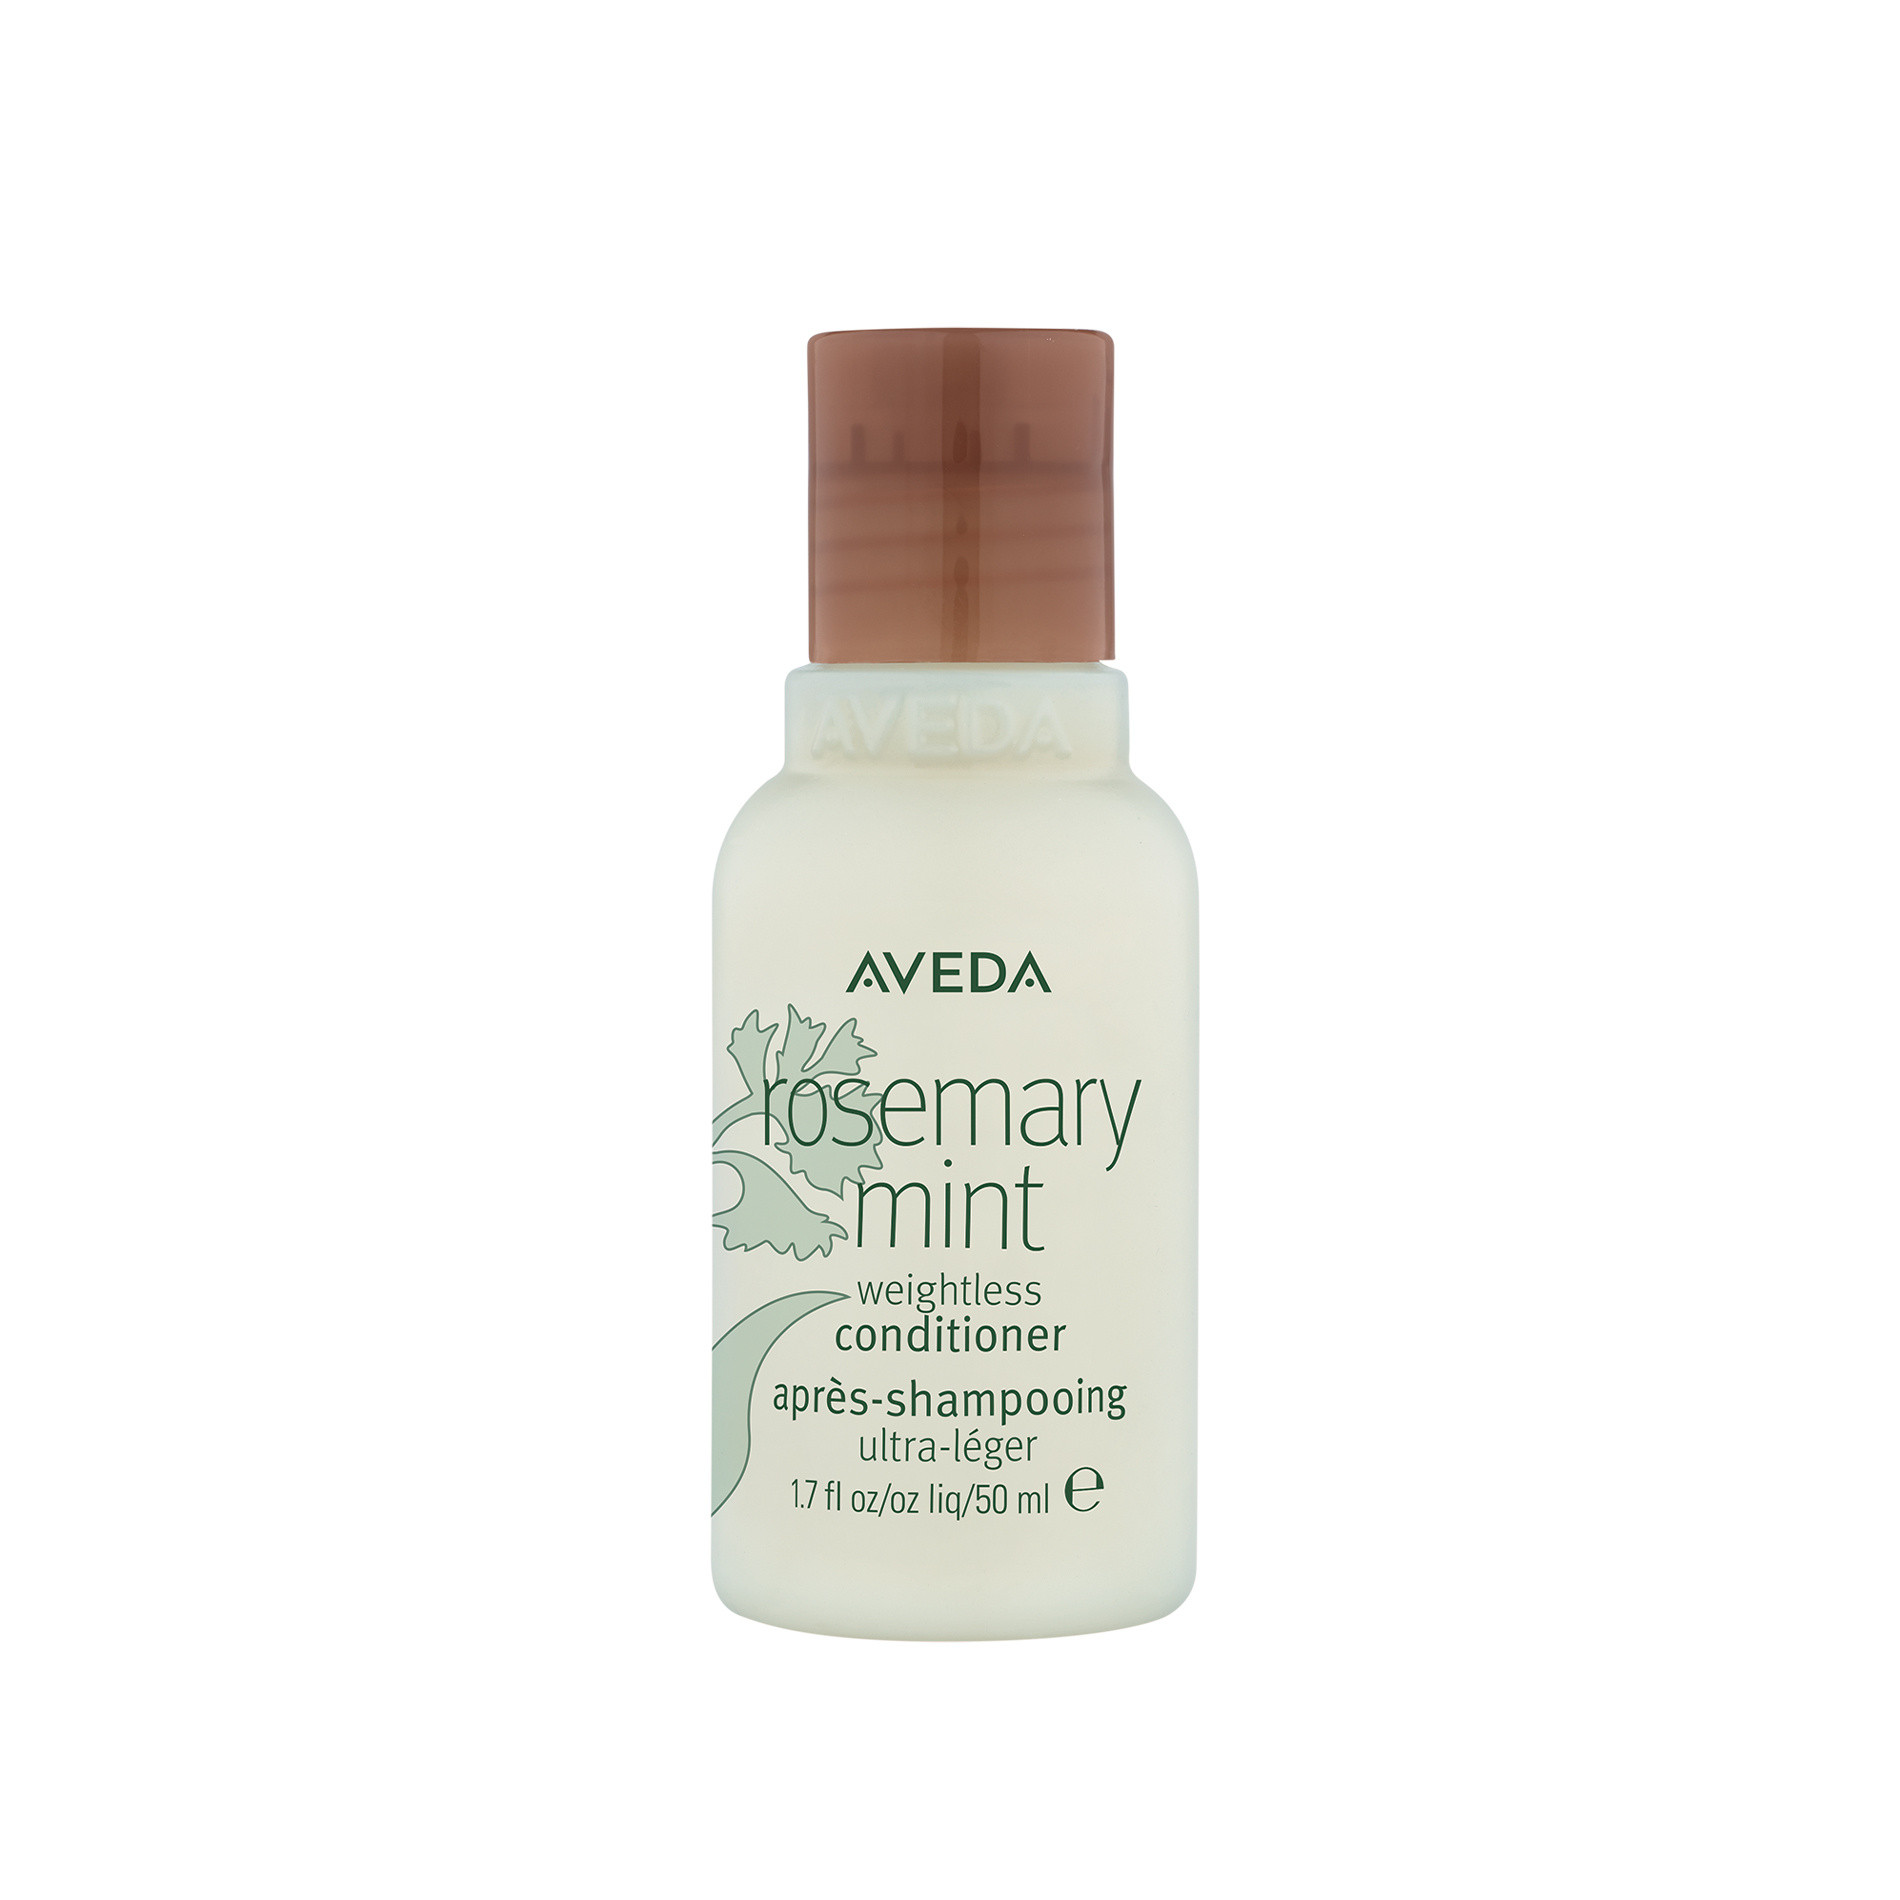 Aveda rosemary mint weightless conditioner 50 ml, Green, large image number 0